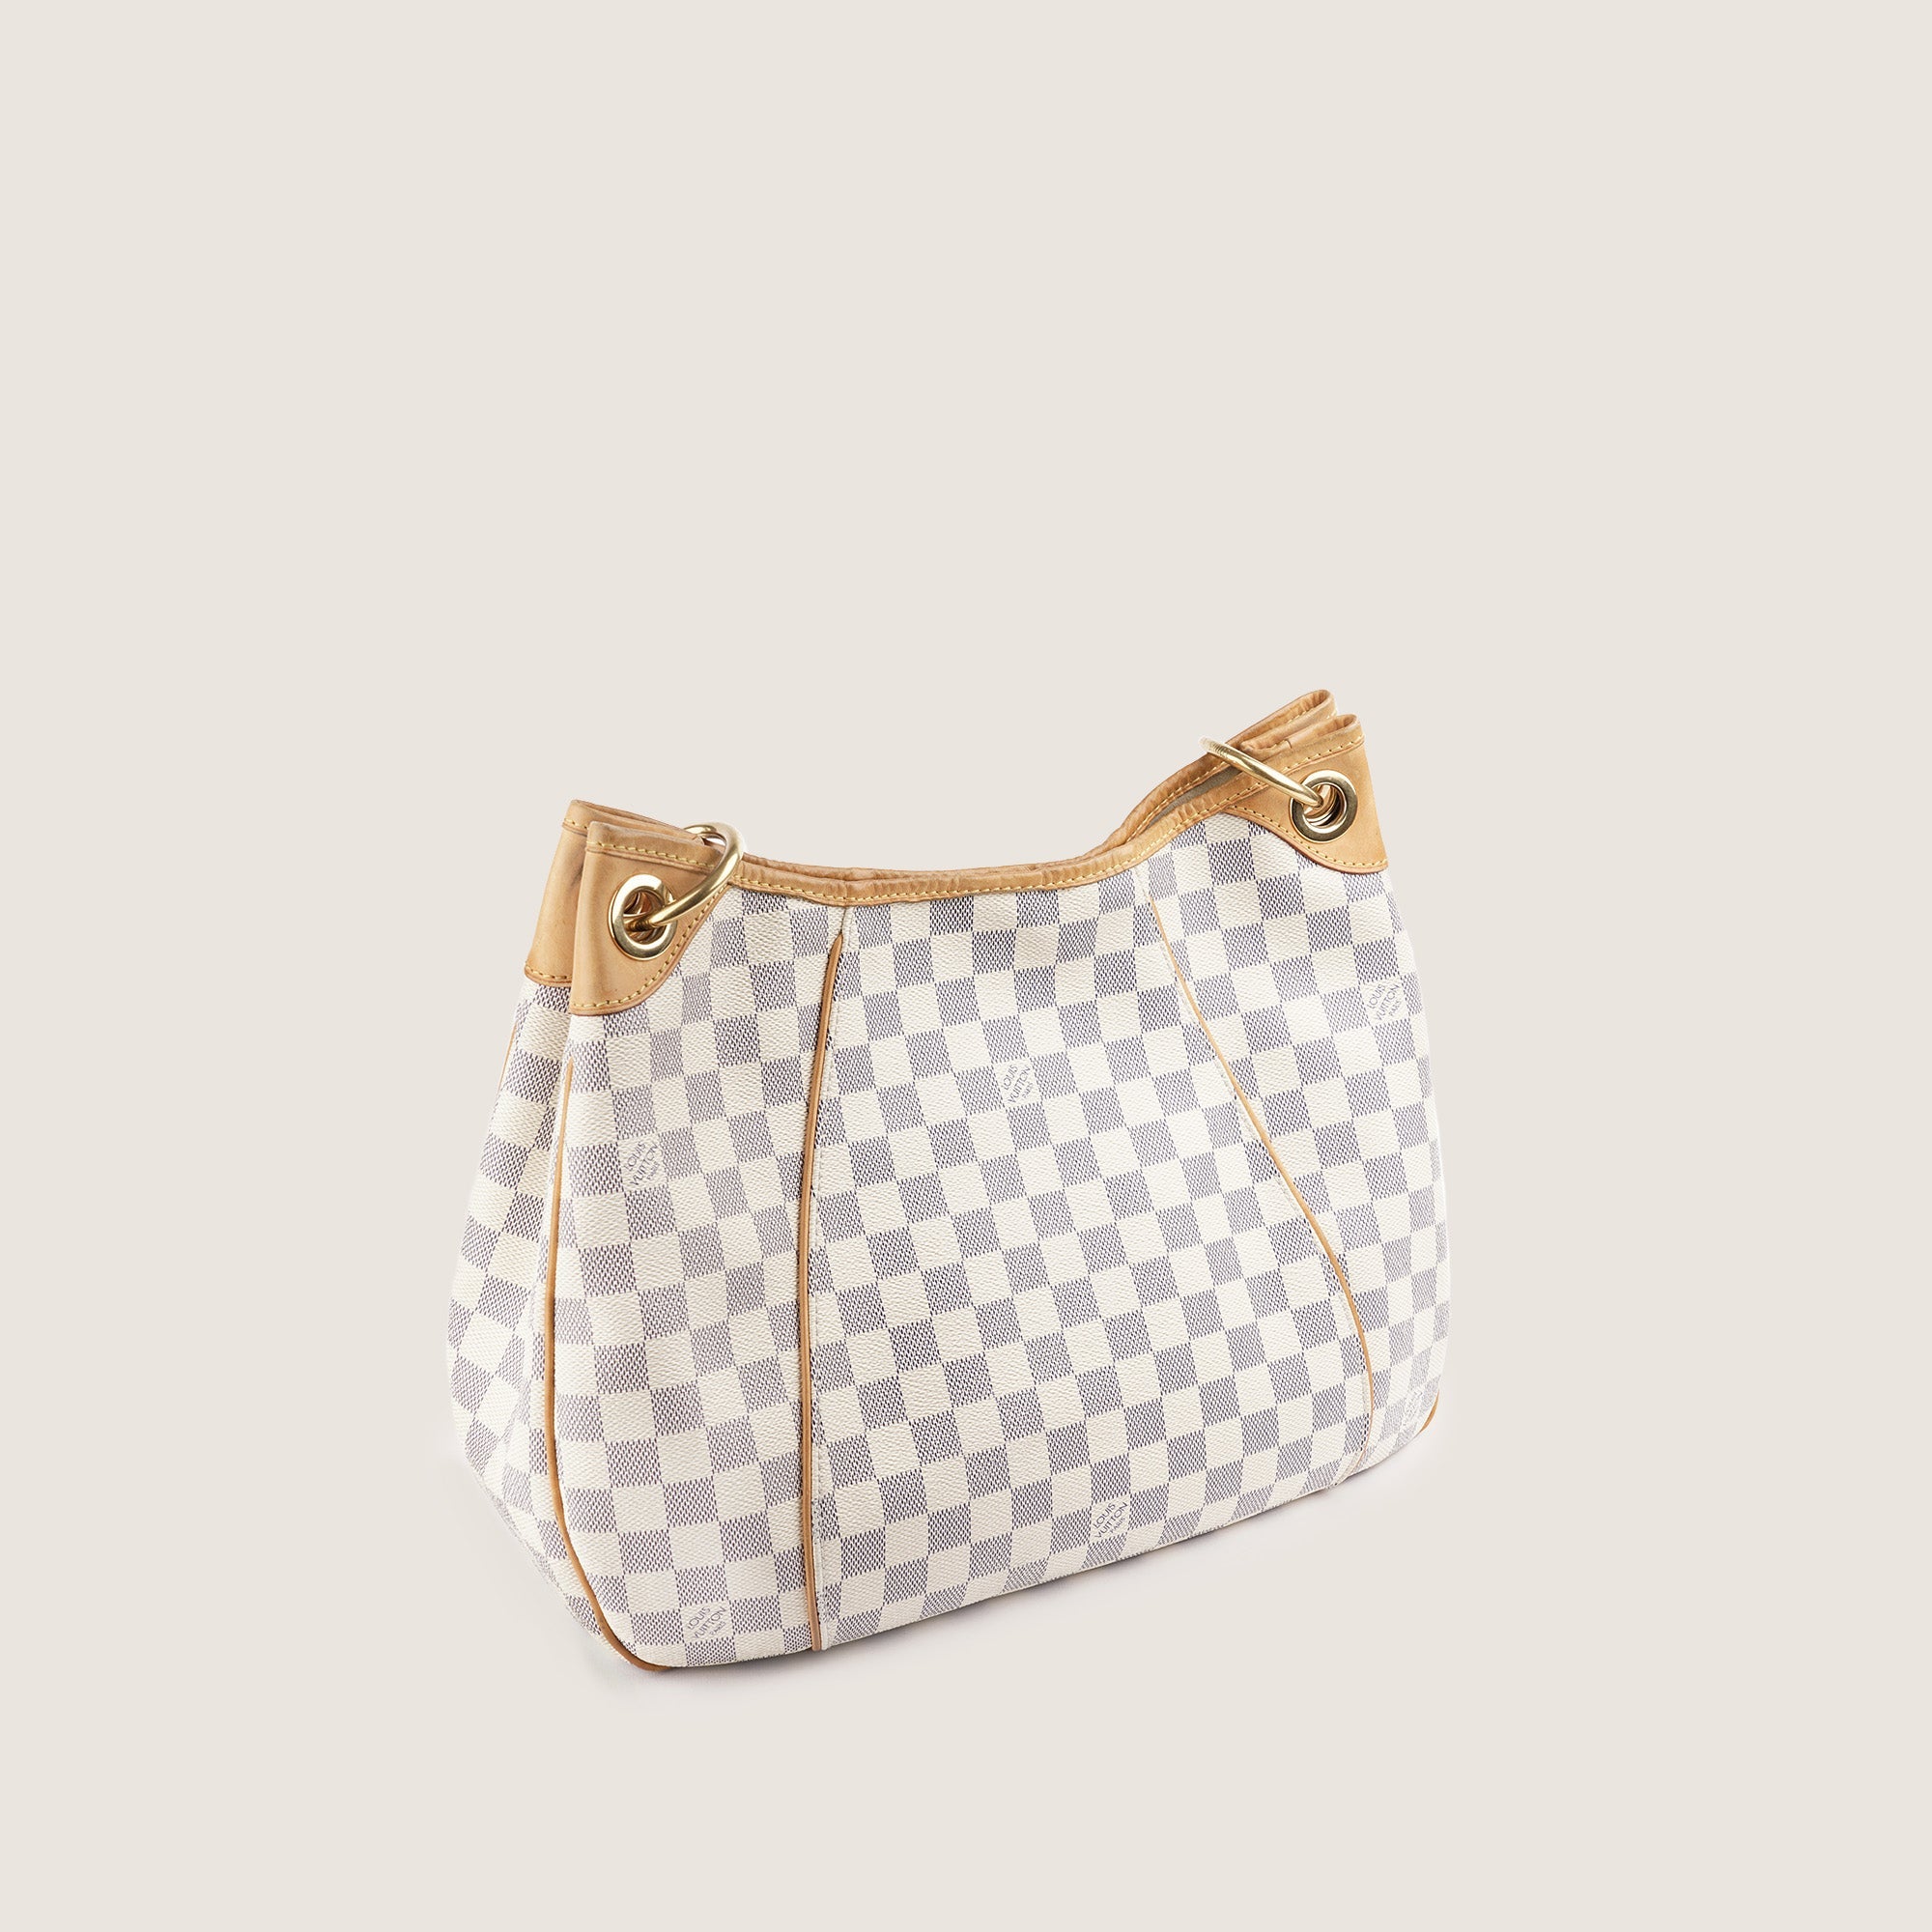 Galliera PM Tote Bag - LOUIS VUITTON - Affordable Luxury image